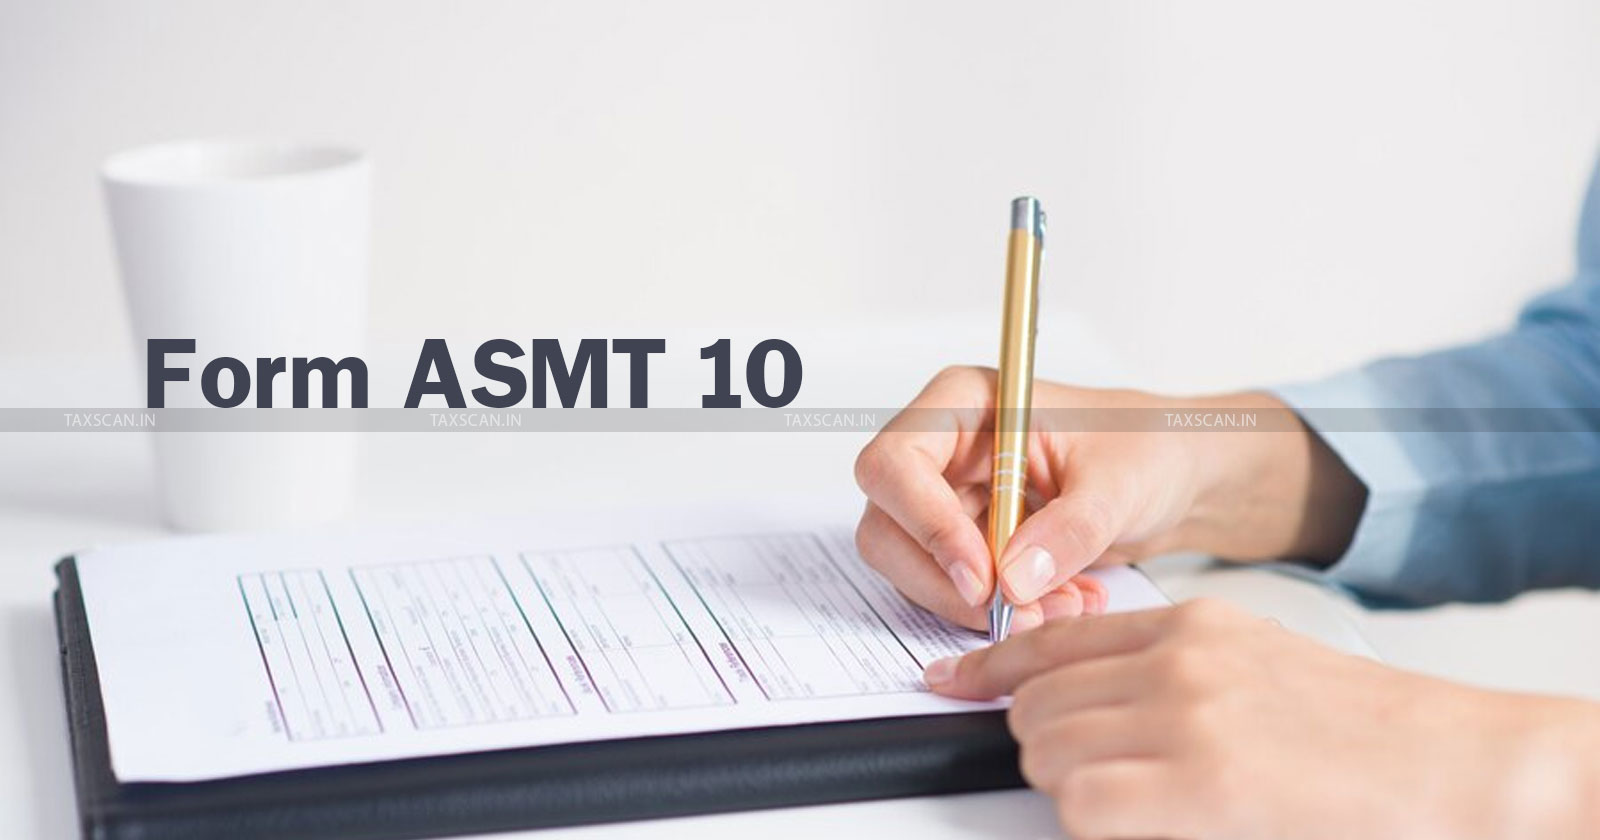 Failure to Reply - Form ASMT 10 - SCN invites GST Demand Order - Madras HC - Pre-deposit Condition - taxscan